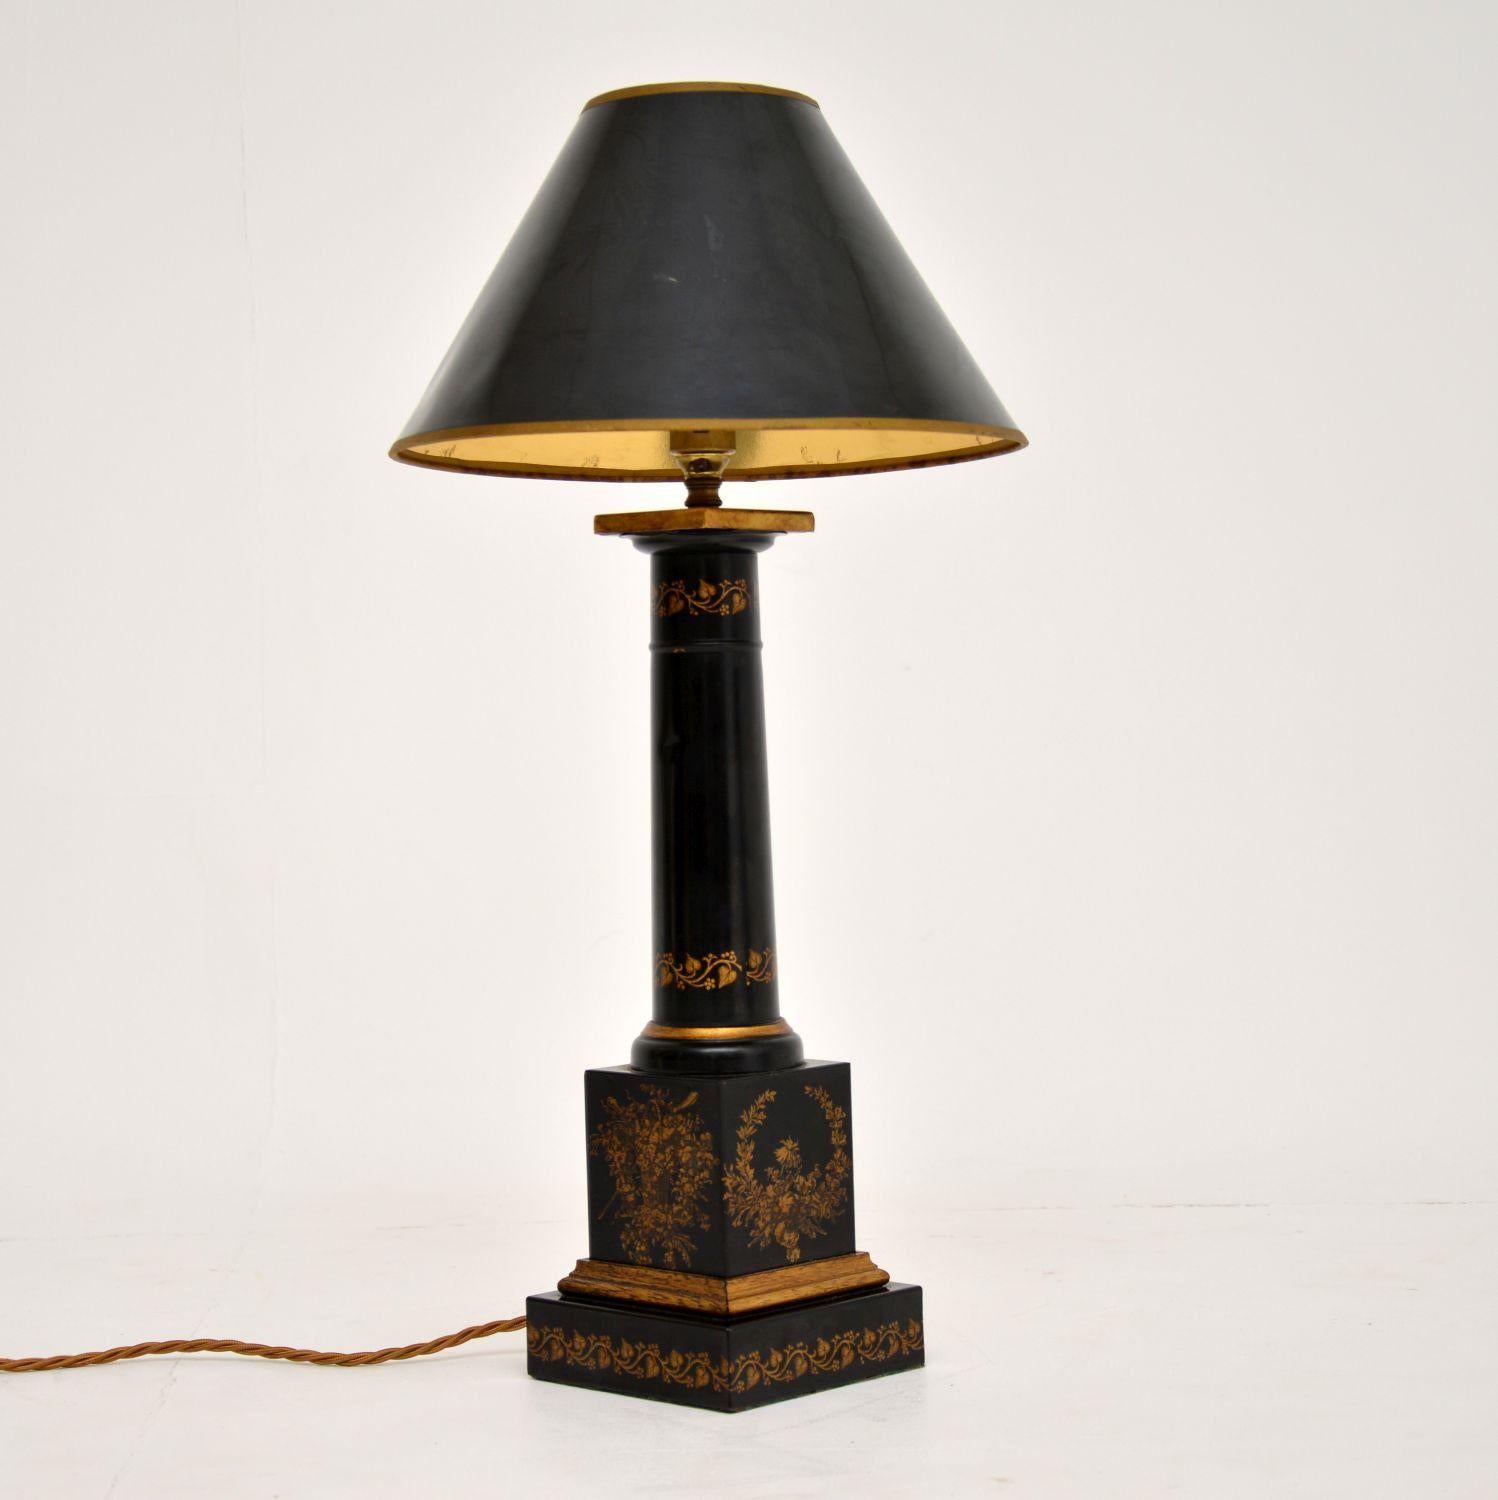 Antique French Empire Neoclassical style Tole metal table lamp in excellent original condition with floral decoration.

This lamp has a very bold form. The shade which was on this when we acquired it, is perfect for the base & is in okay condition,